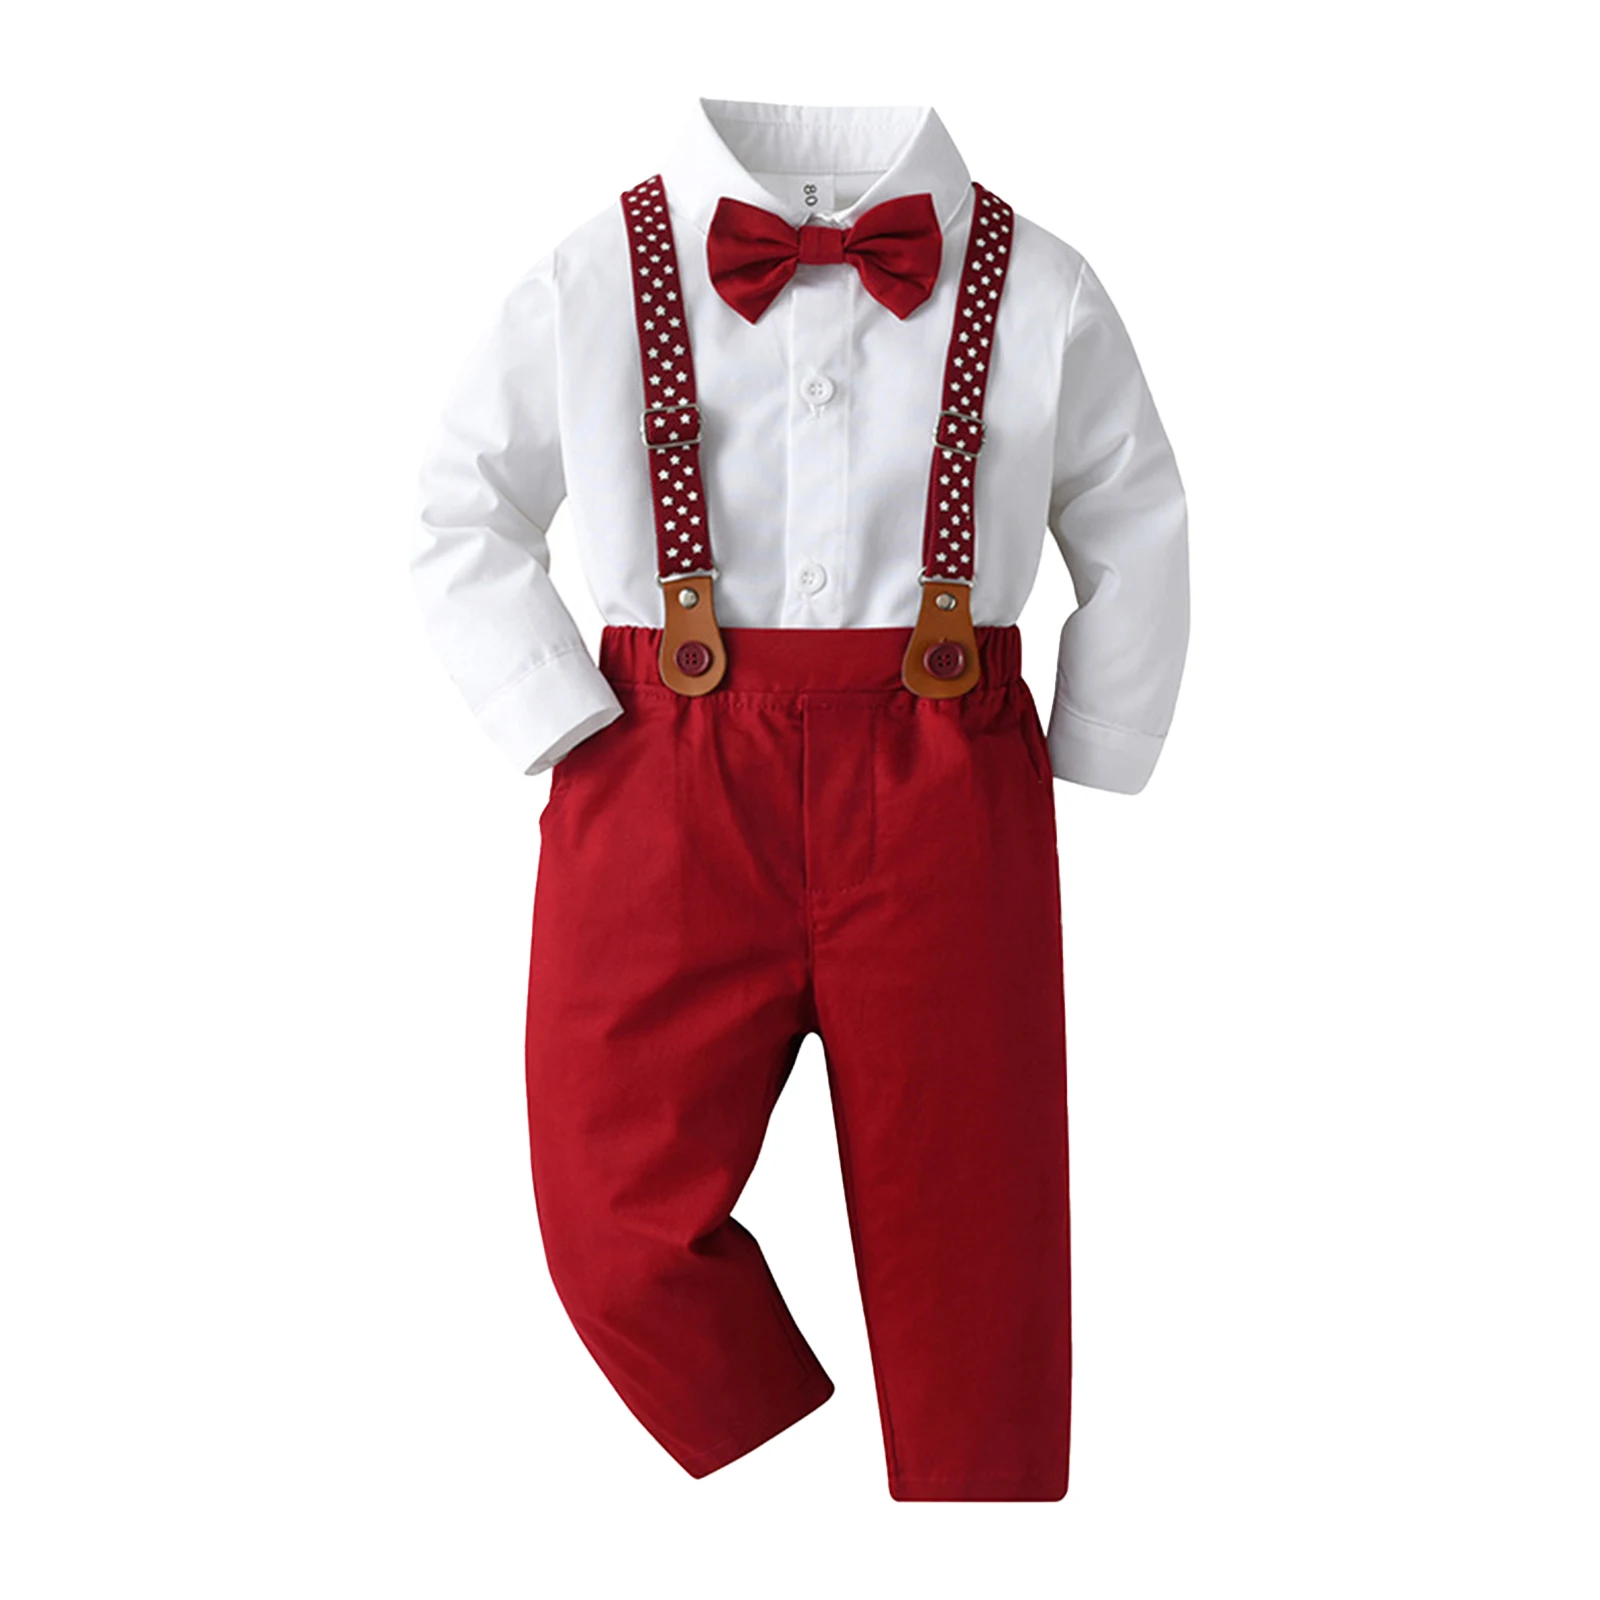 Baby Boys Gentleman Outfit Cotton Clothes Birthday Party Wedding Prom Gown Long Sleeve Shirt Top+Bowtie+Suspender Pants 3Pcs/Set random 3pcs pink folder storage supplies long tail clip book ticket holder student stationery old fashioned round tail iron clip